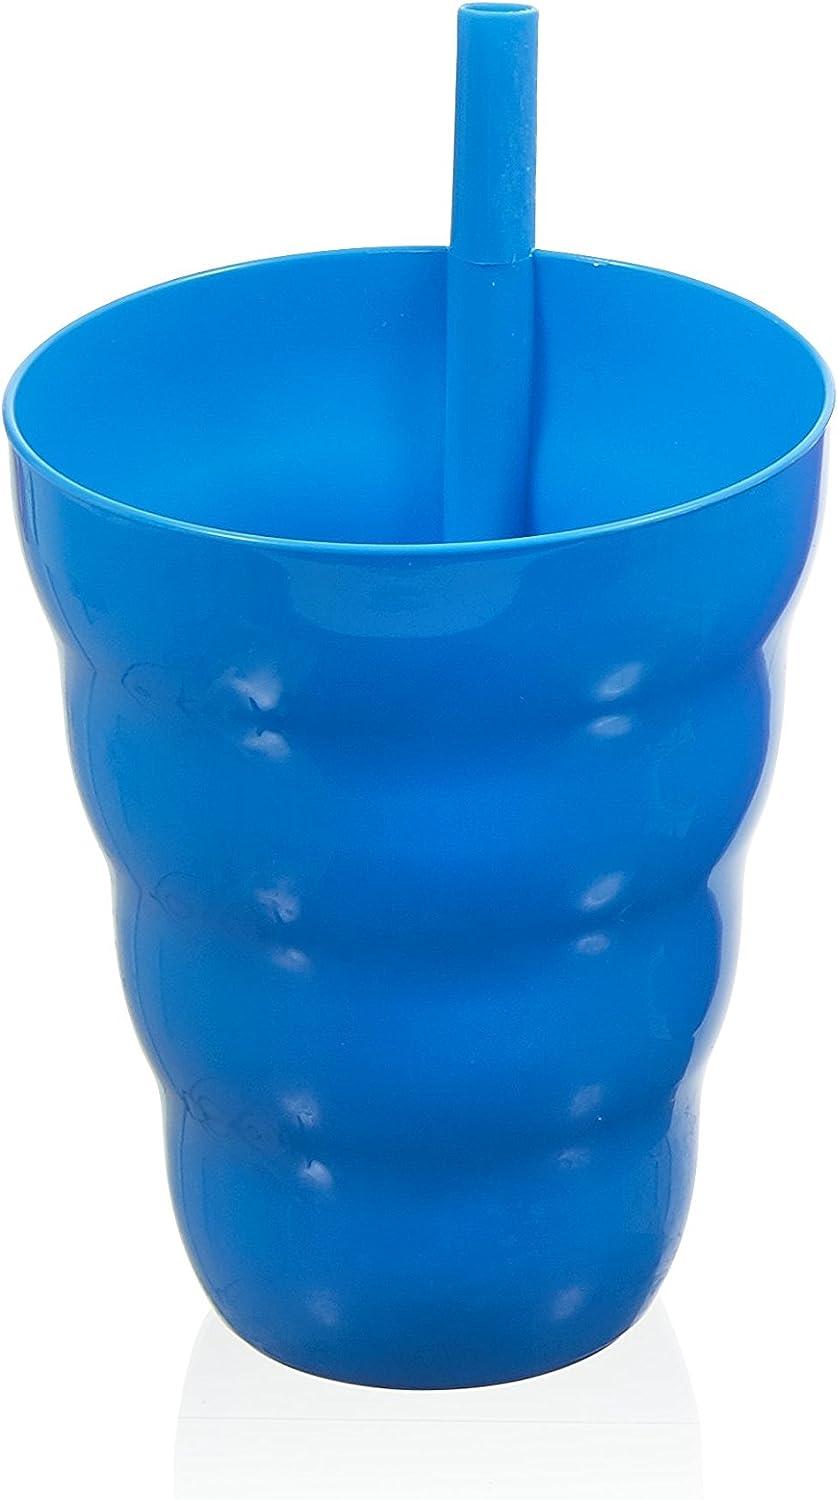 Sip - a - cup with Built-in Straw - Colors Vary - Qty:1 Sip-A-Cup 10-Ounce  Assorted